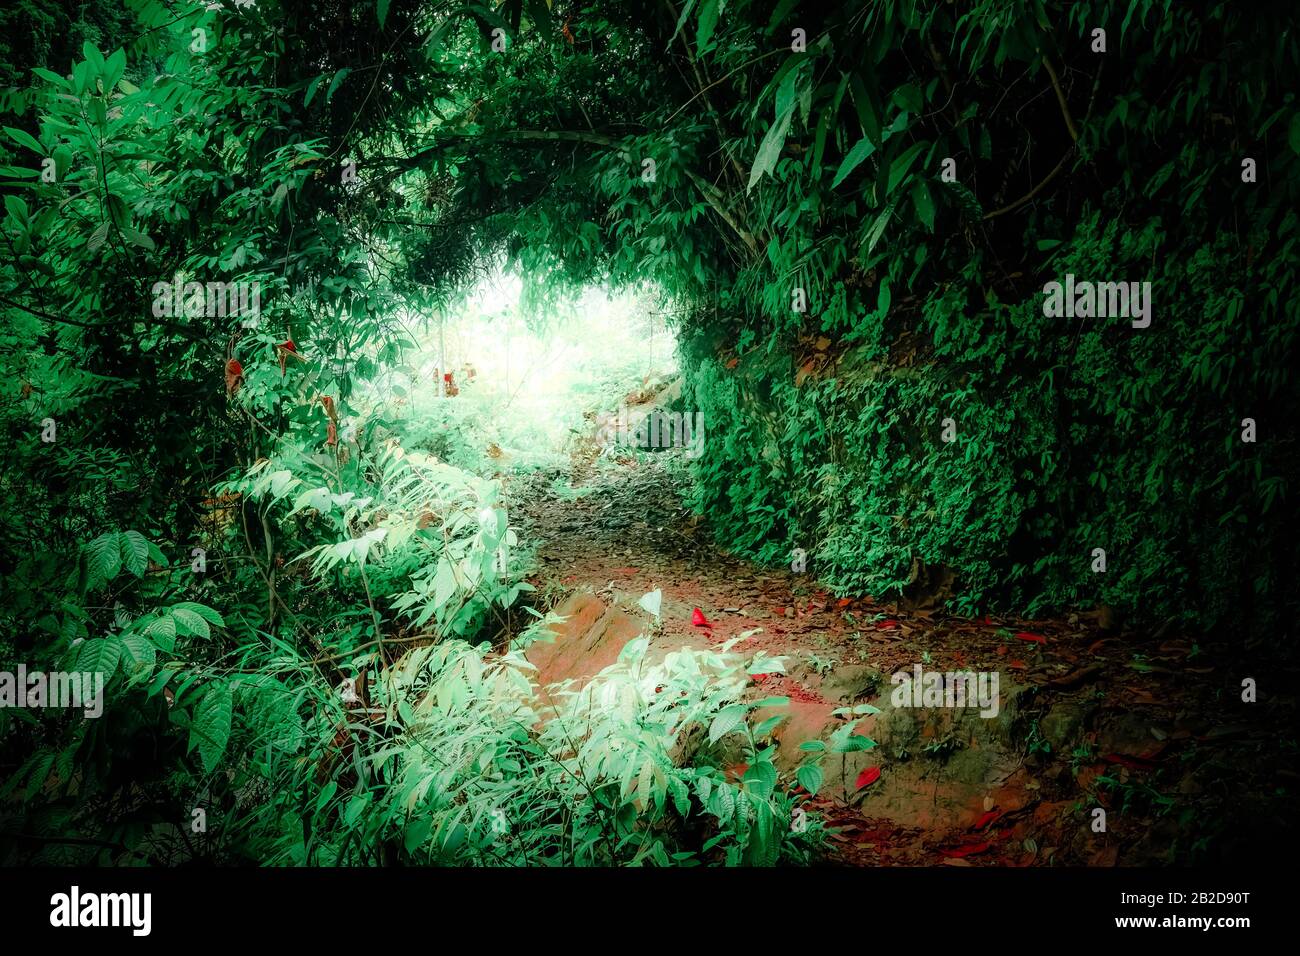 Fantasy landscape of tropical jungle forest with tunnel and path way through lush Stock Photo